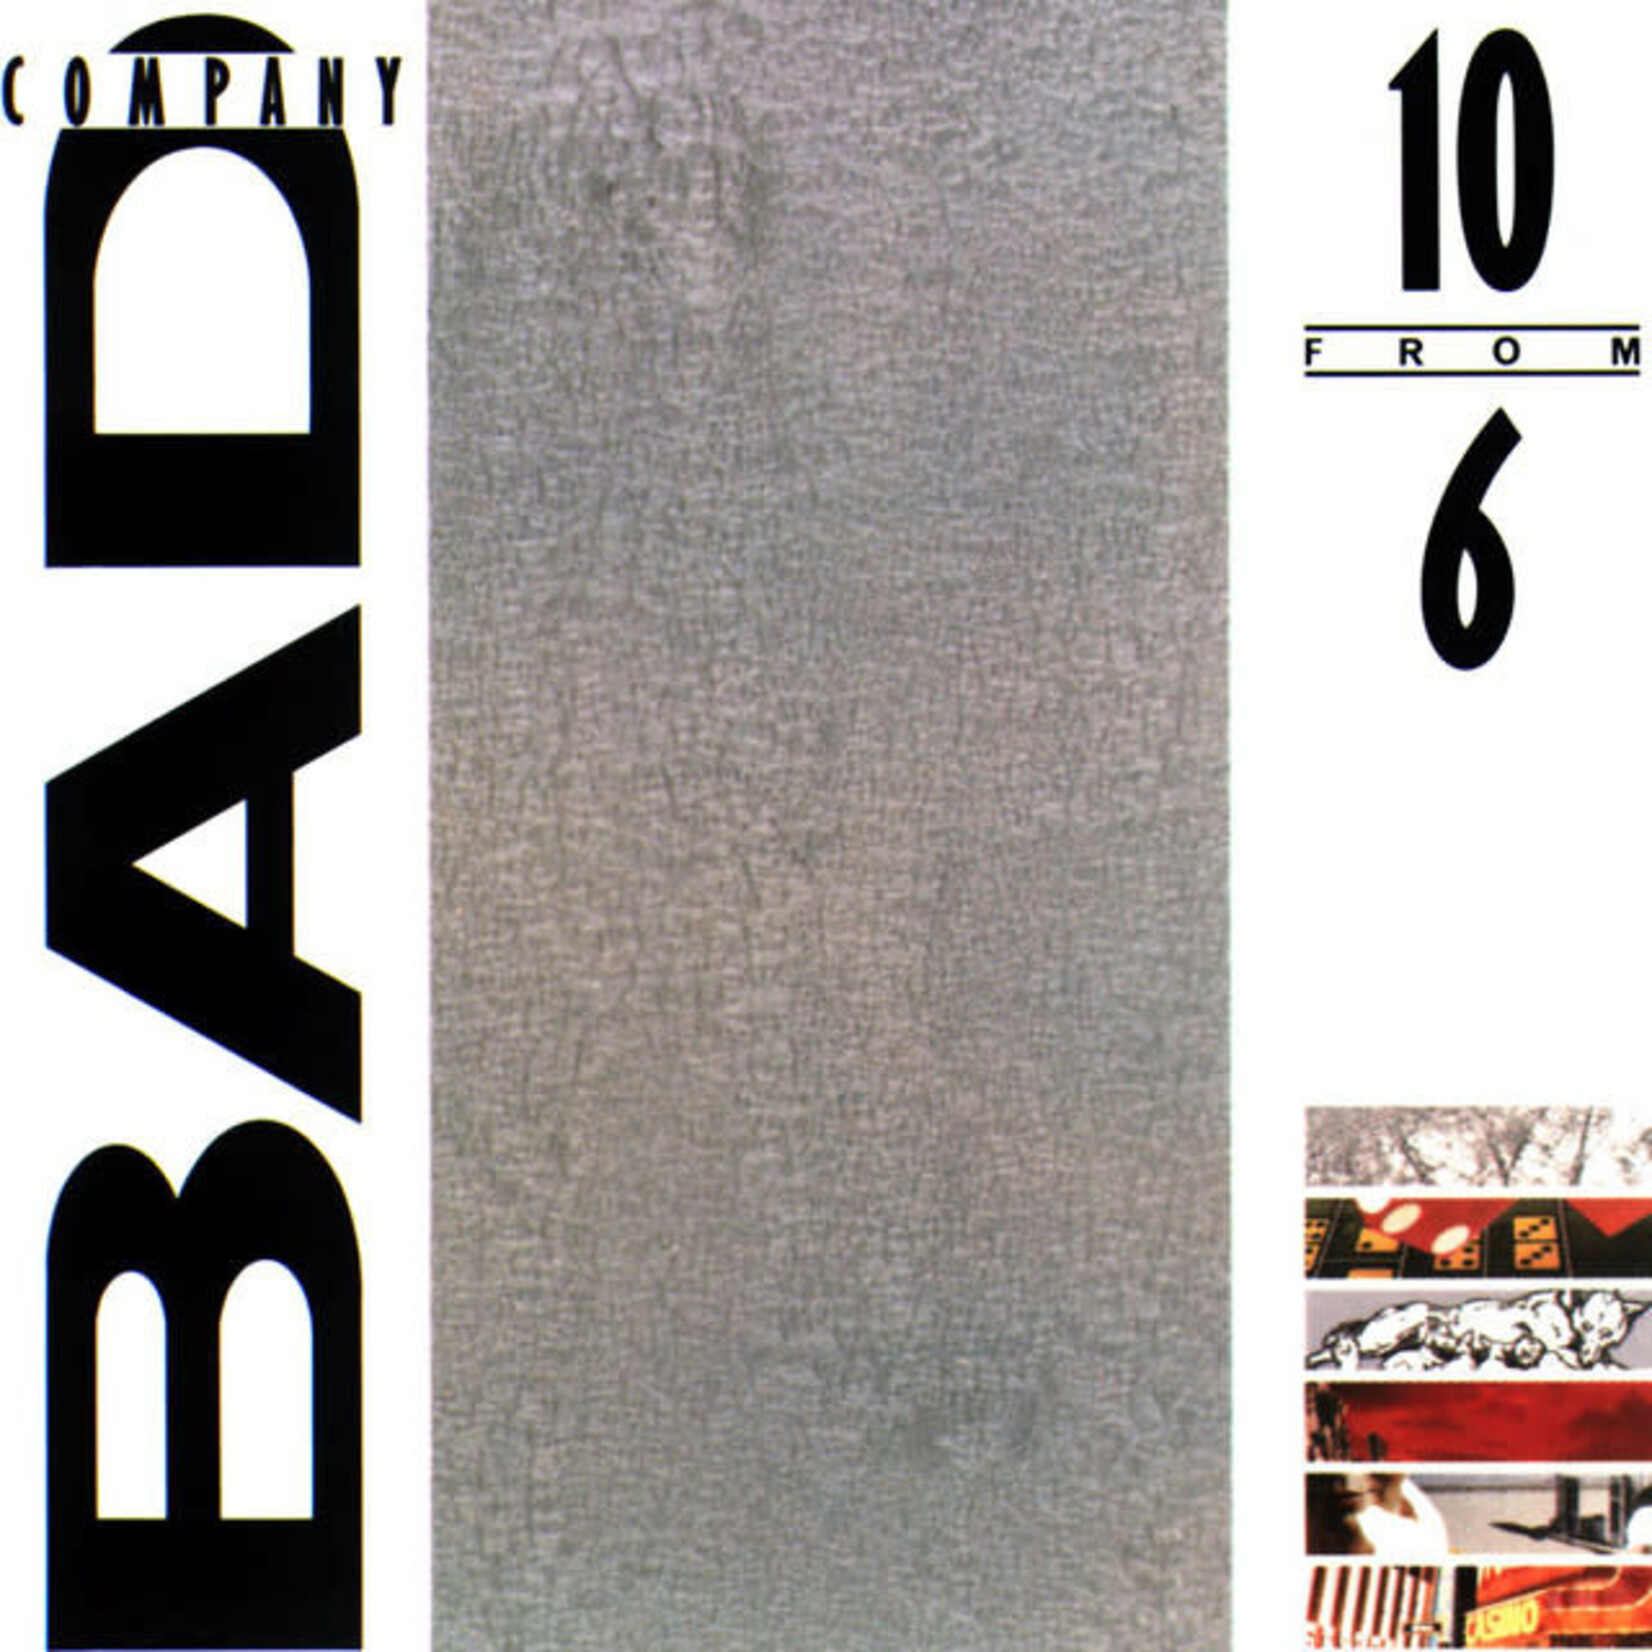 Bad Company - 10 From 6 [USED CD]